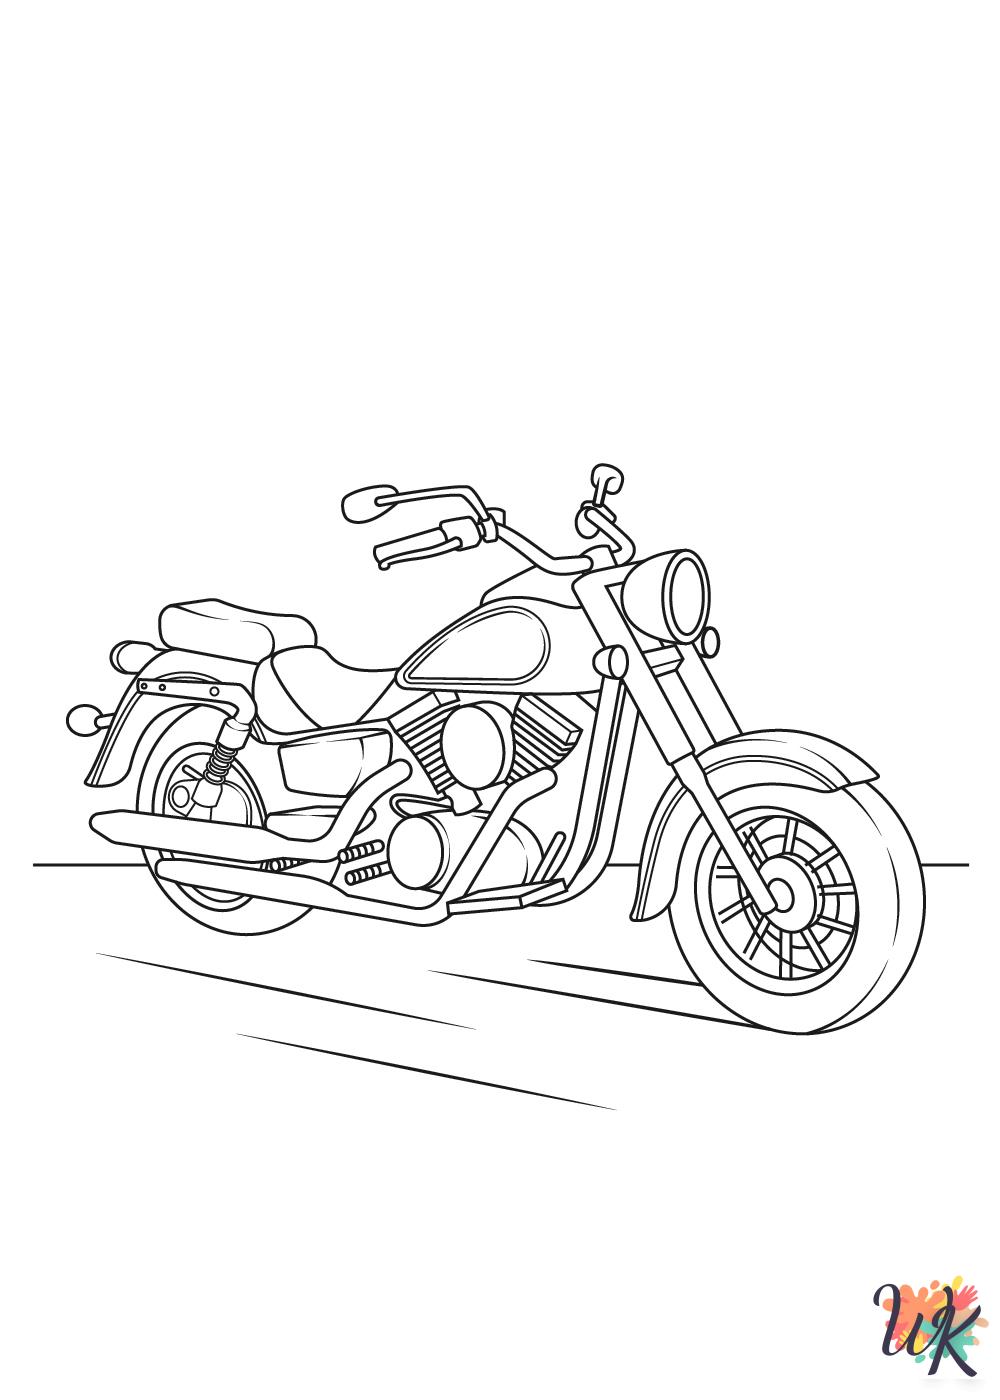 Motorcycle coloring pages for adults